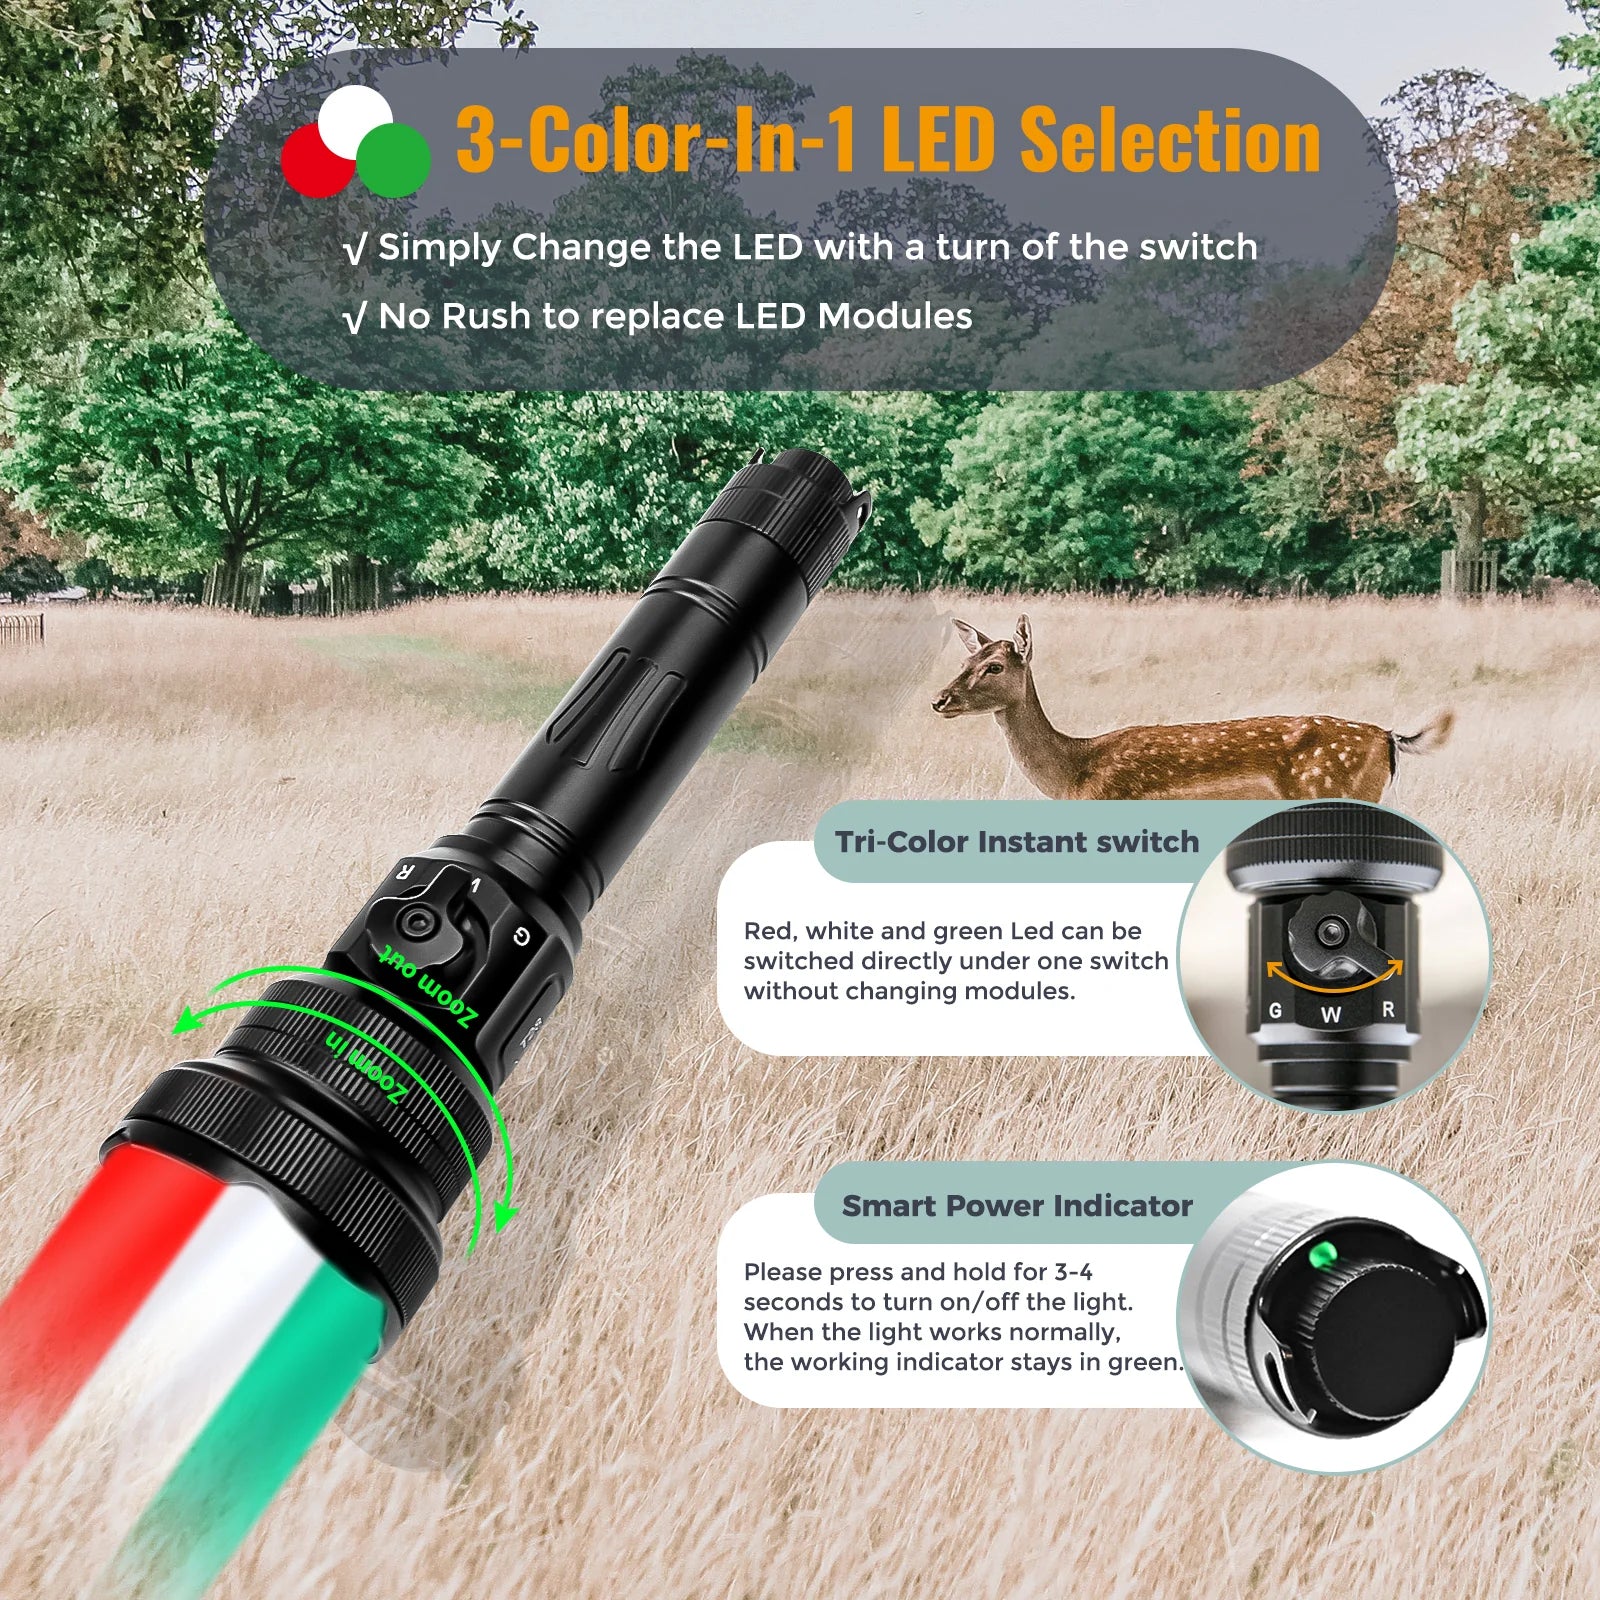 How to choose a light fixture suitable for wild boar hunting?